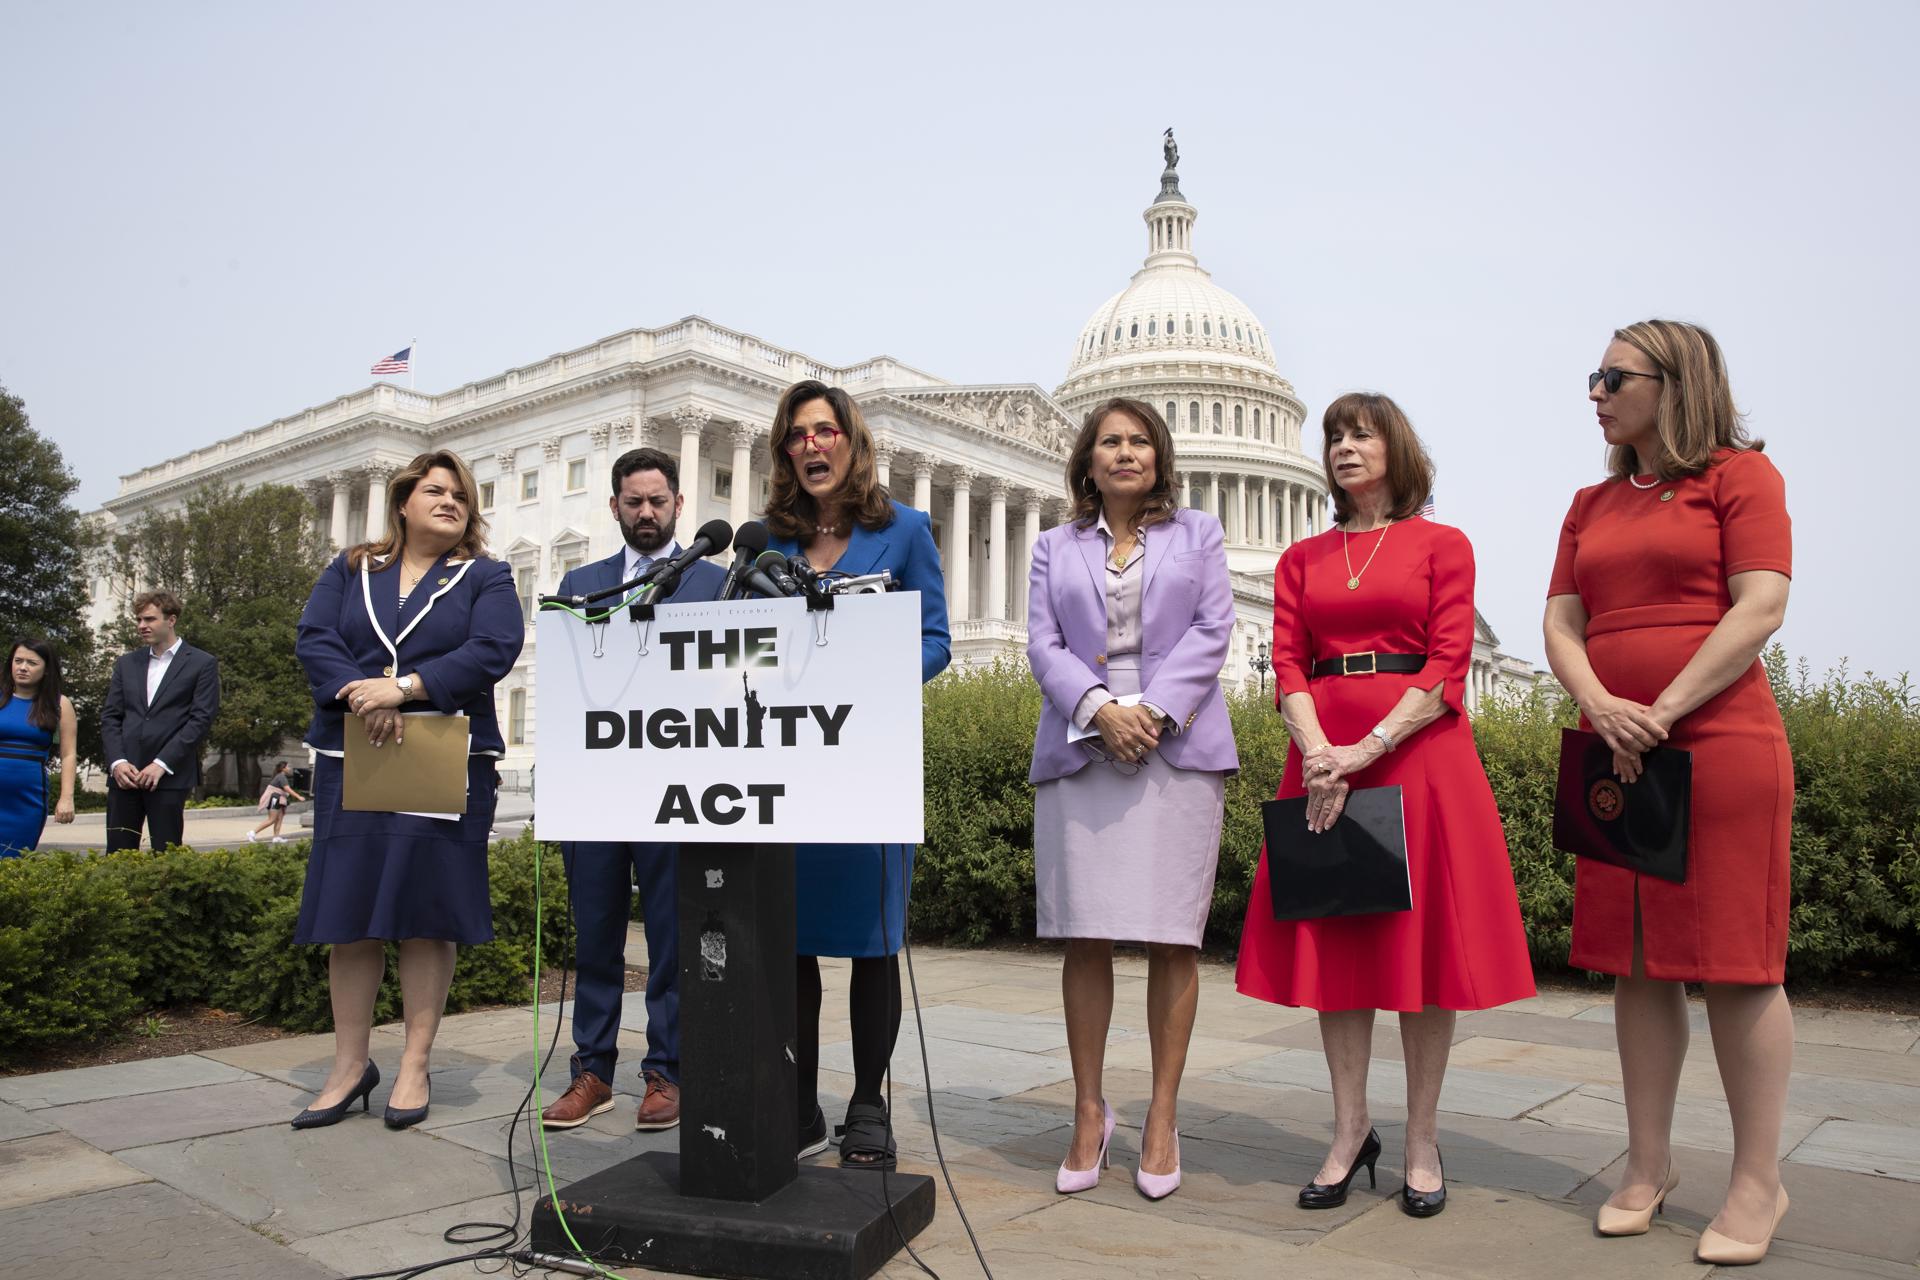 (Left to right) Puerto Rican Congresswoman Jenniffer Gonzalez; Republican lawmakers Mike Lawler and Maria Elvira Salazar; and Democratic Congresswomen Veronica Escobar, Kathy Manning and Hillary Scholten participate in a press conference to introduce bipartisan immigration reform legislation dubbed "The Dignity Act" in Washington DC on May 23, 2023. EFE/EPA/Michael Reynolds